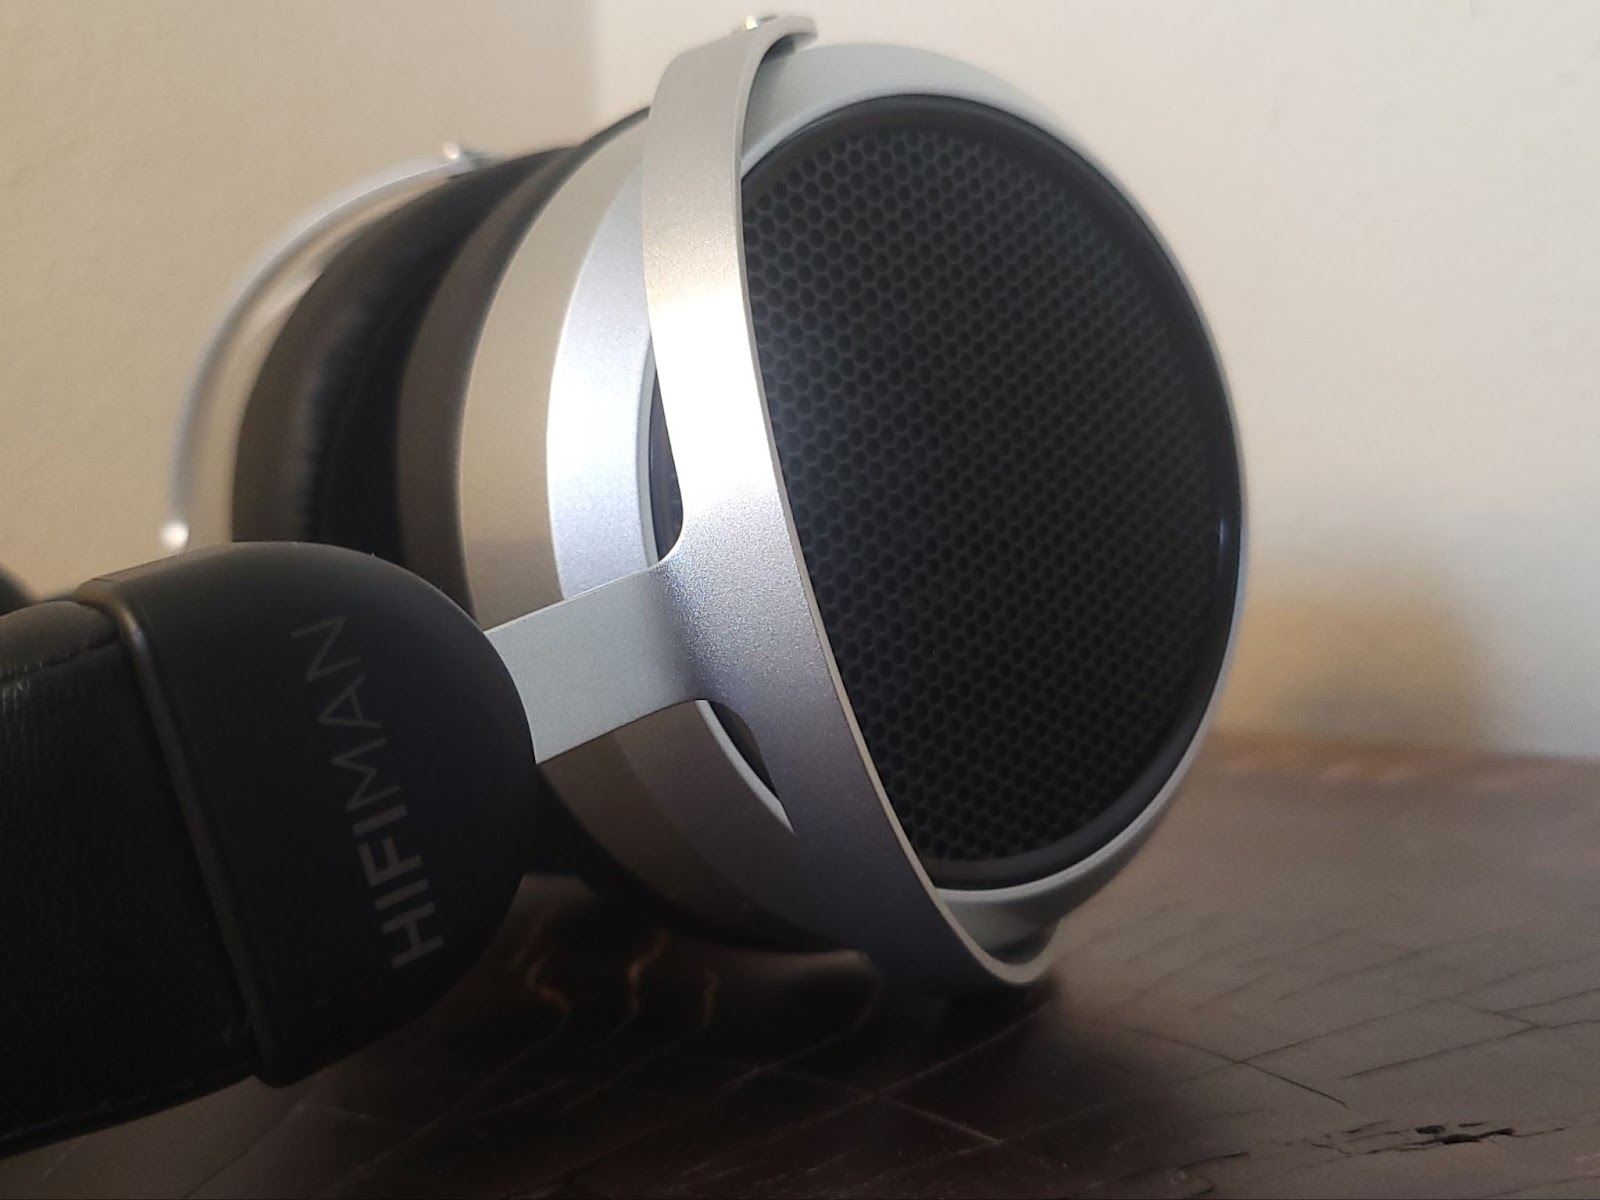 HIFIMAN HE400se - Reviews | Headphone Reviews and Discussion 